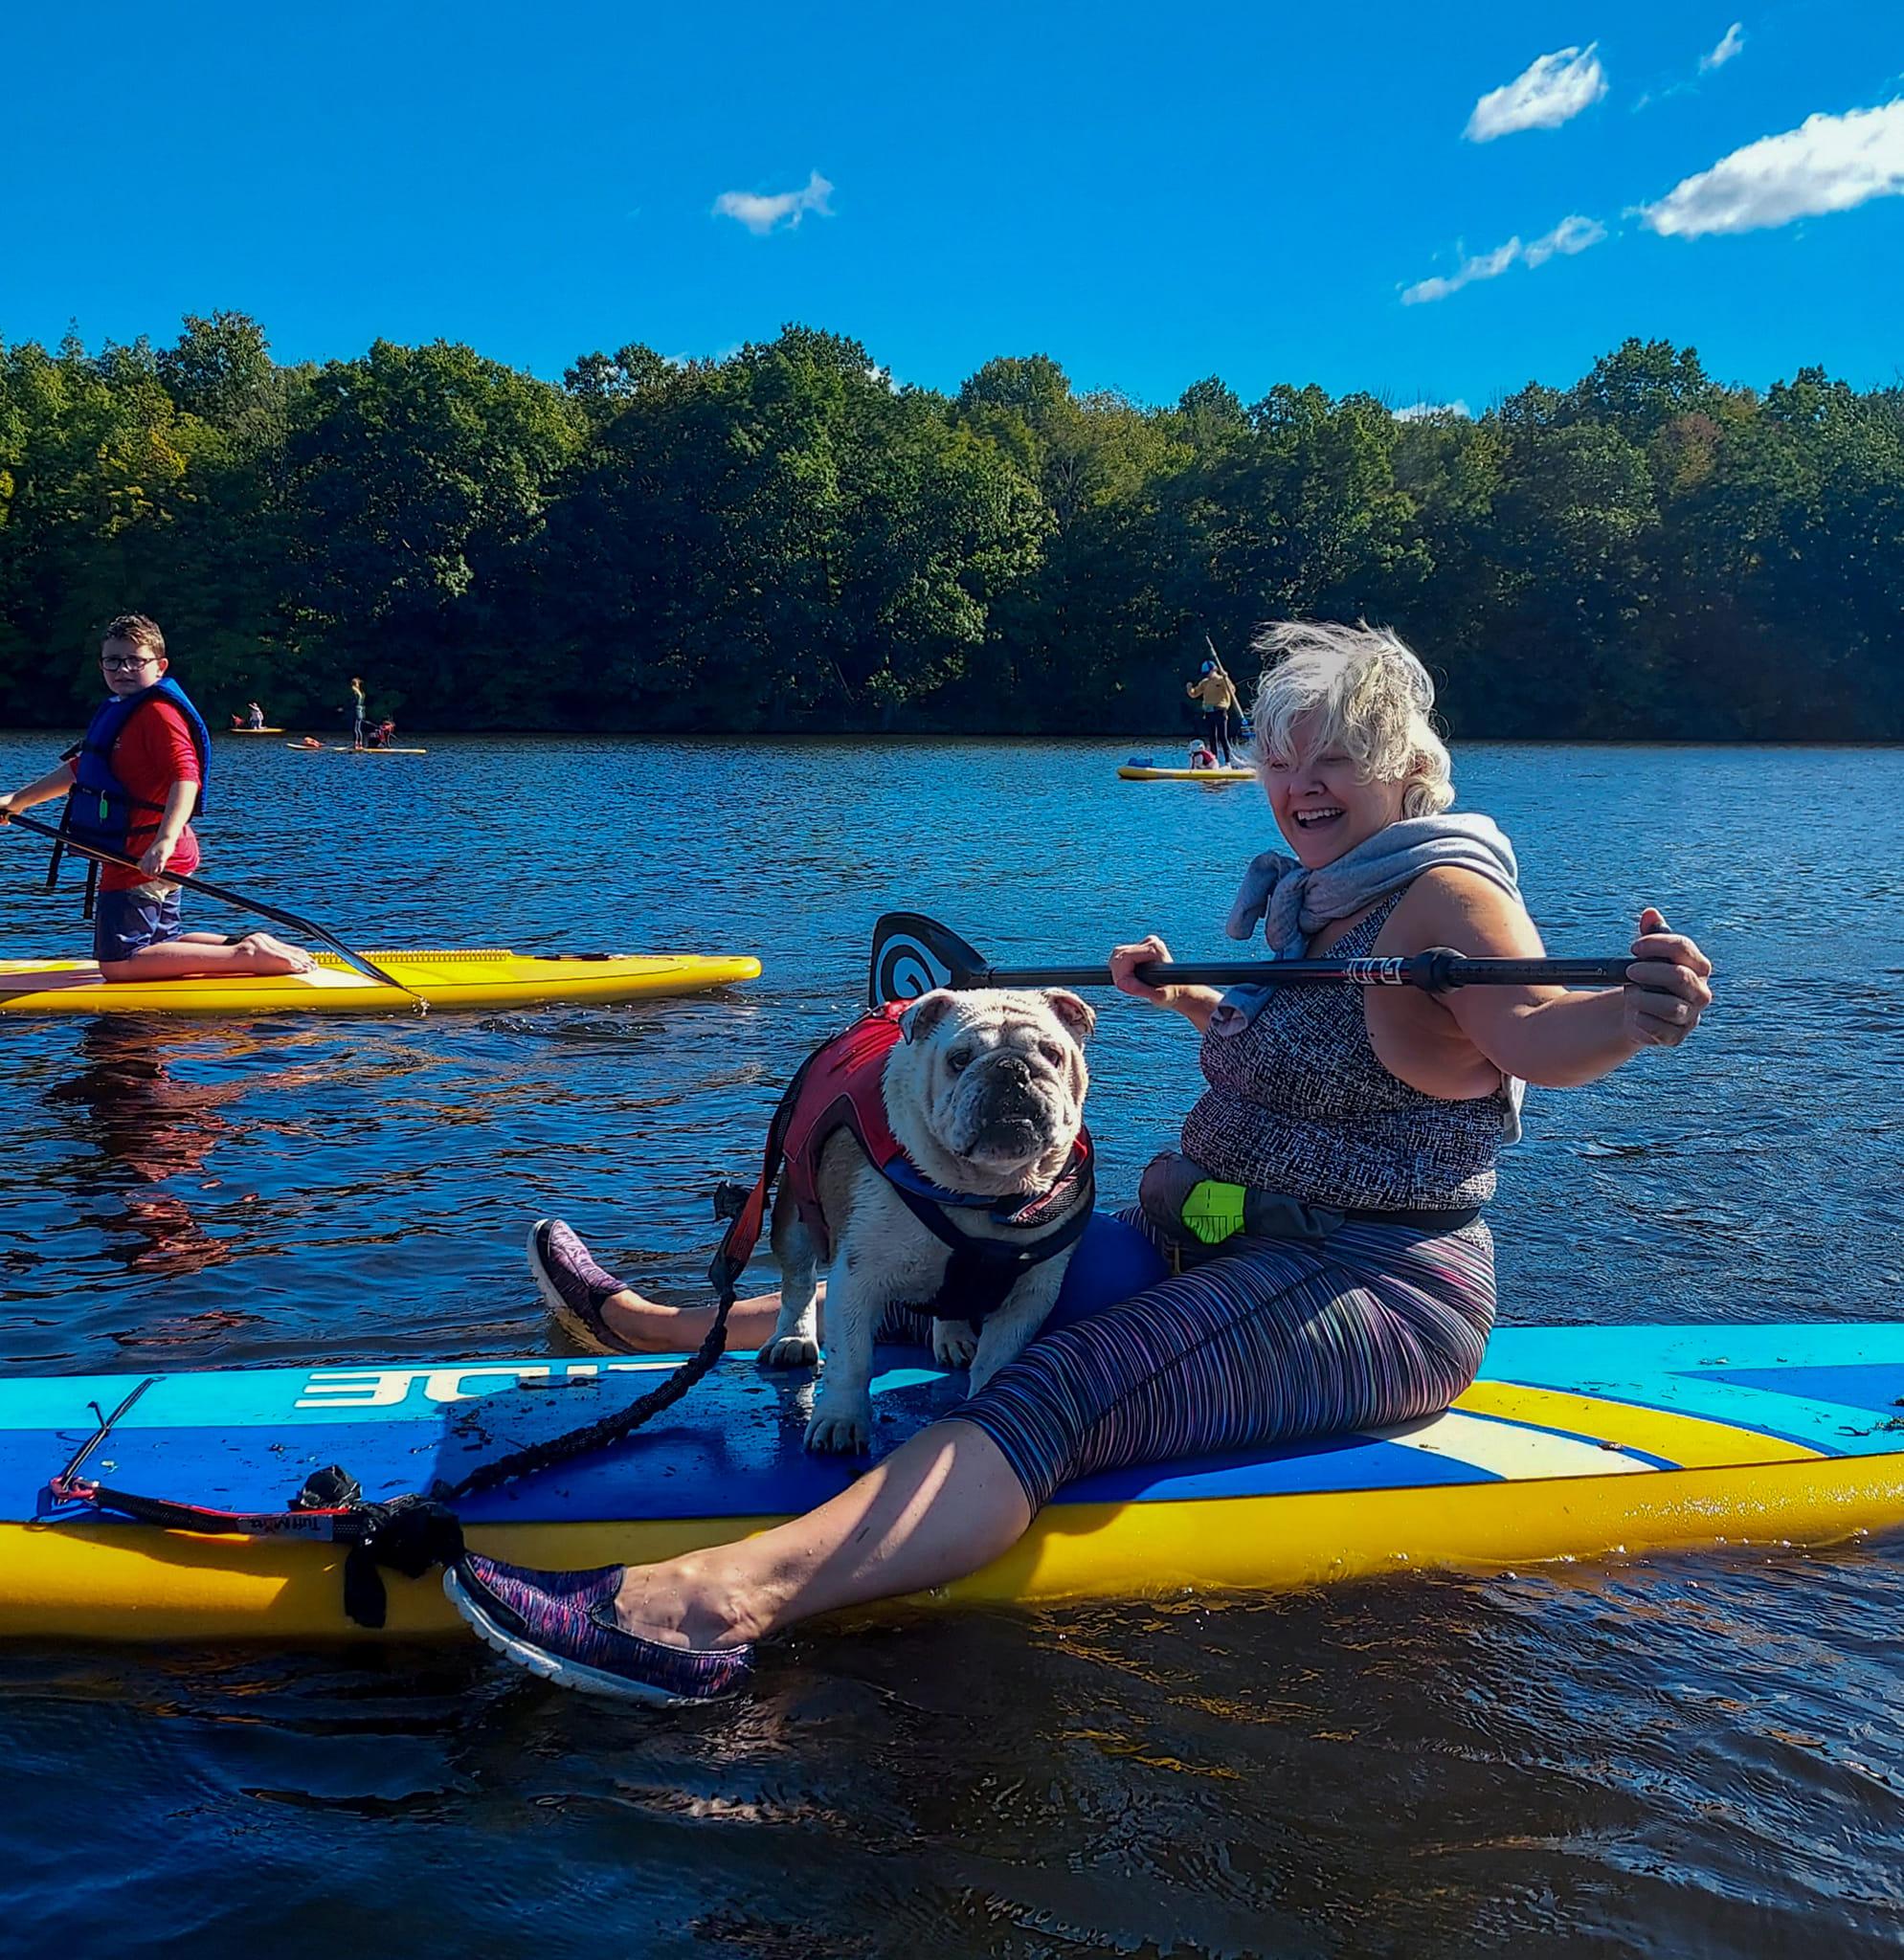 Pet Friendly Paws on Board at Nockamixon State Park